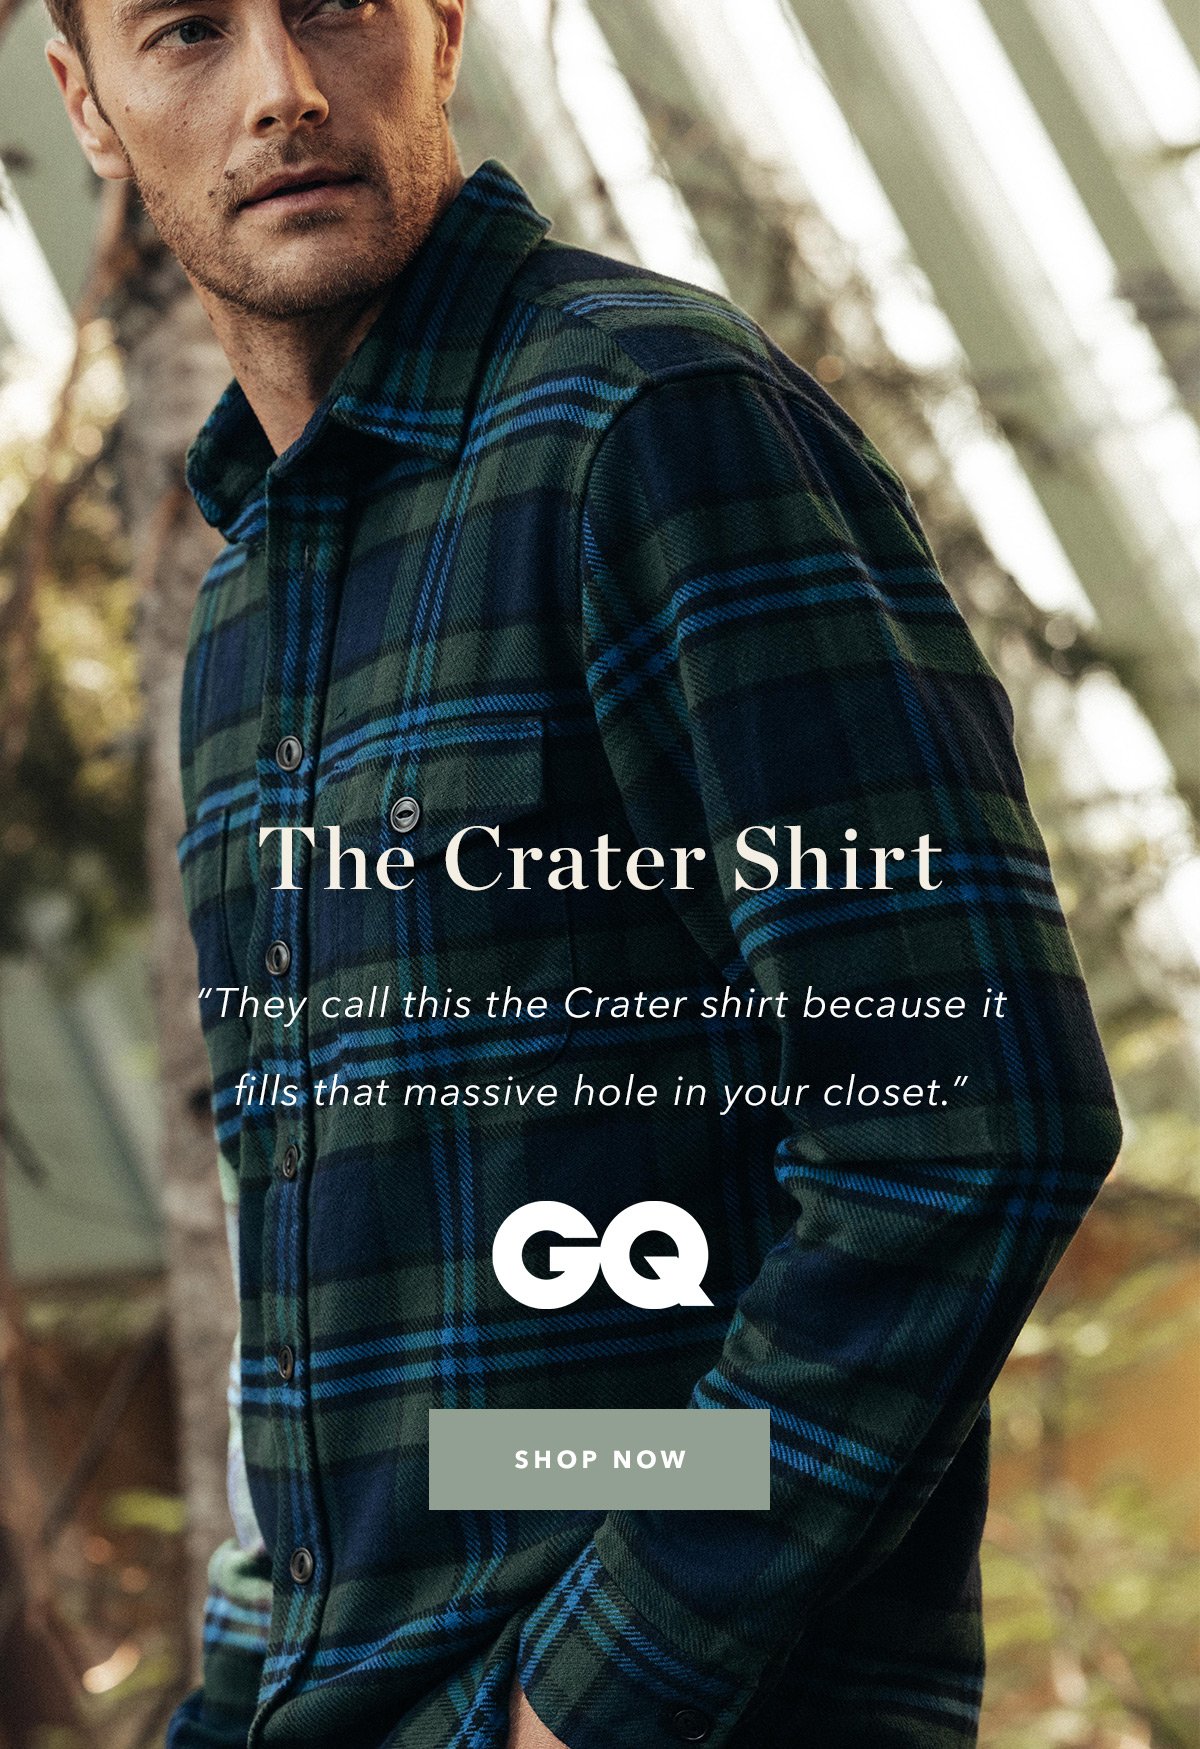 “They call this the Crater shirt because it fills that massive hole in your closet.” – GQ